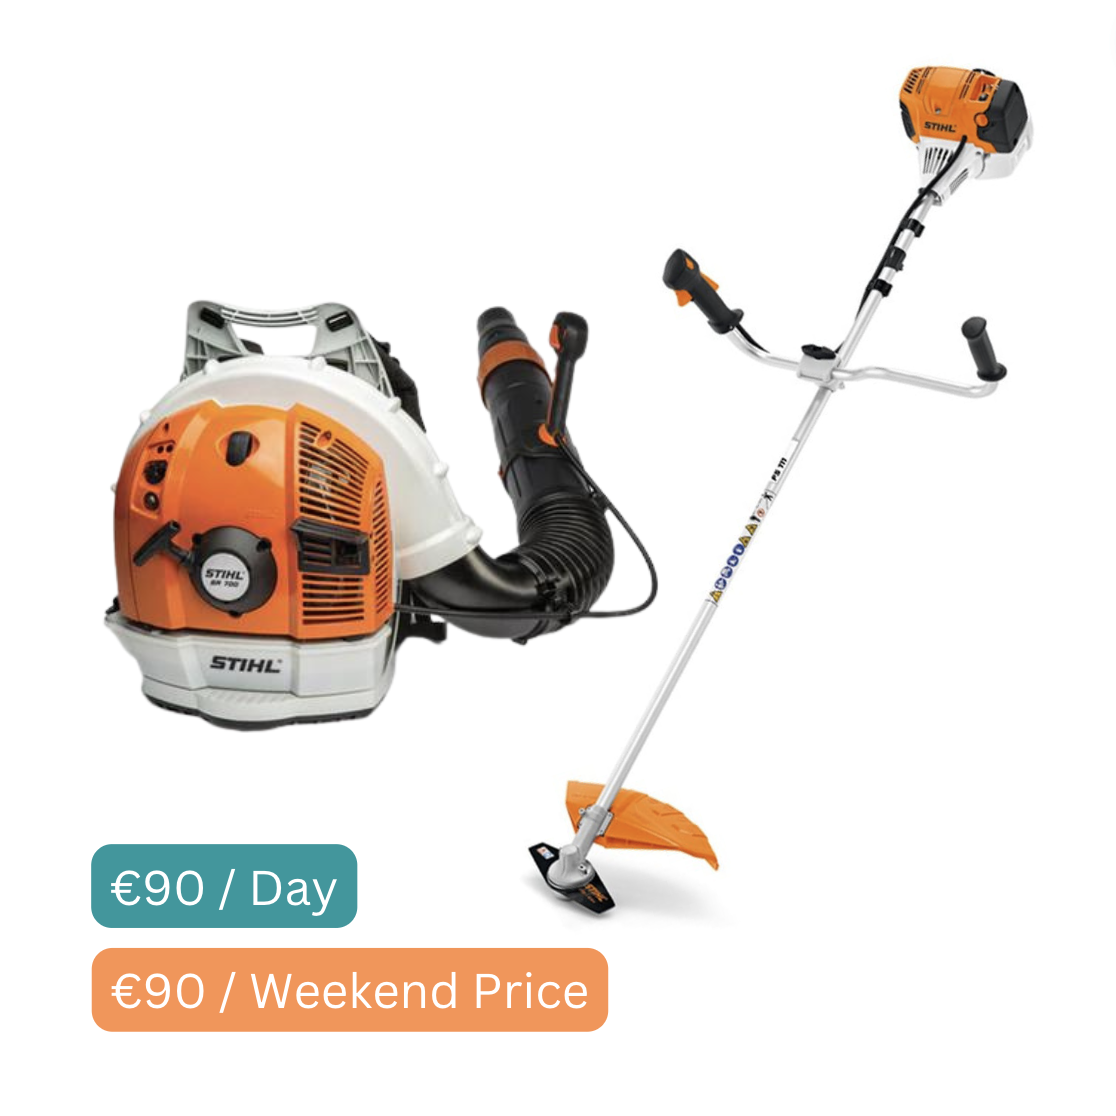 Back Pack Blower & Weed Eater - Hire Bundle